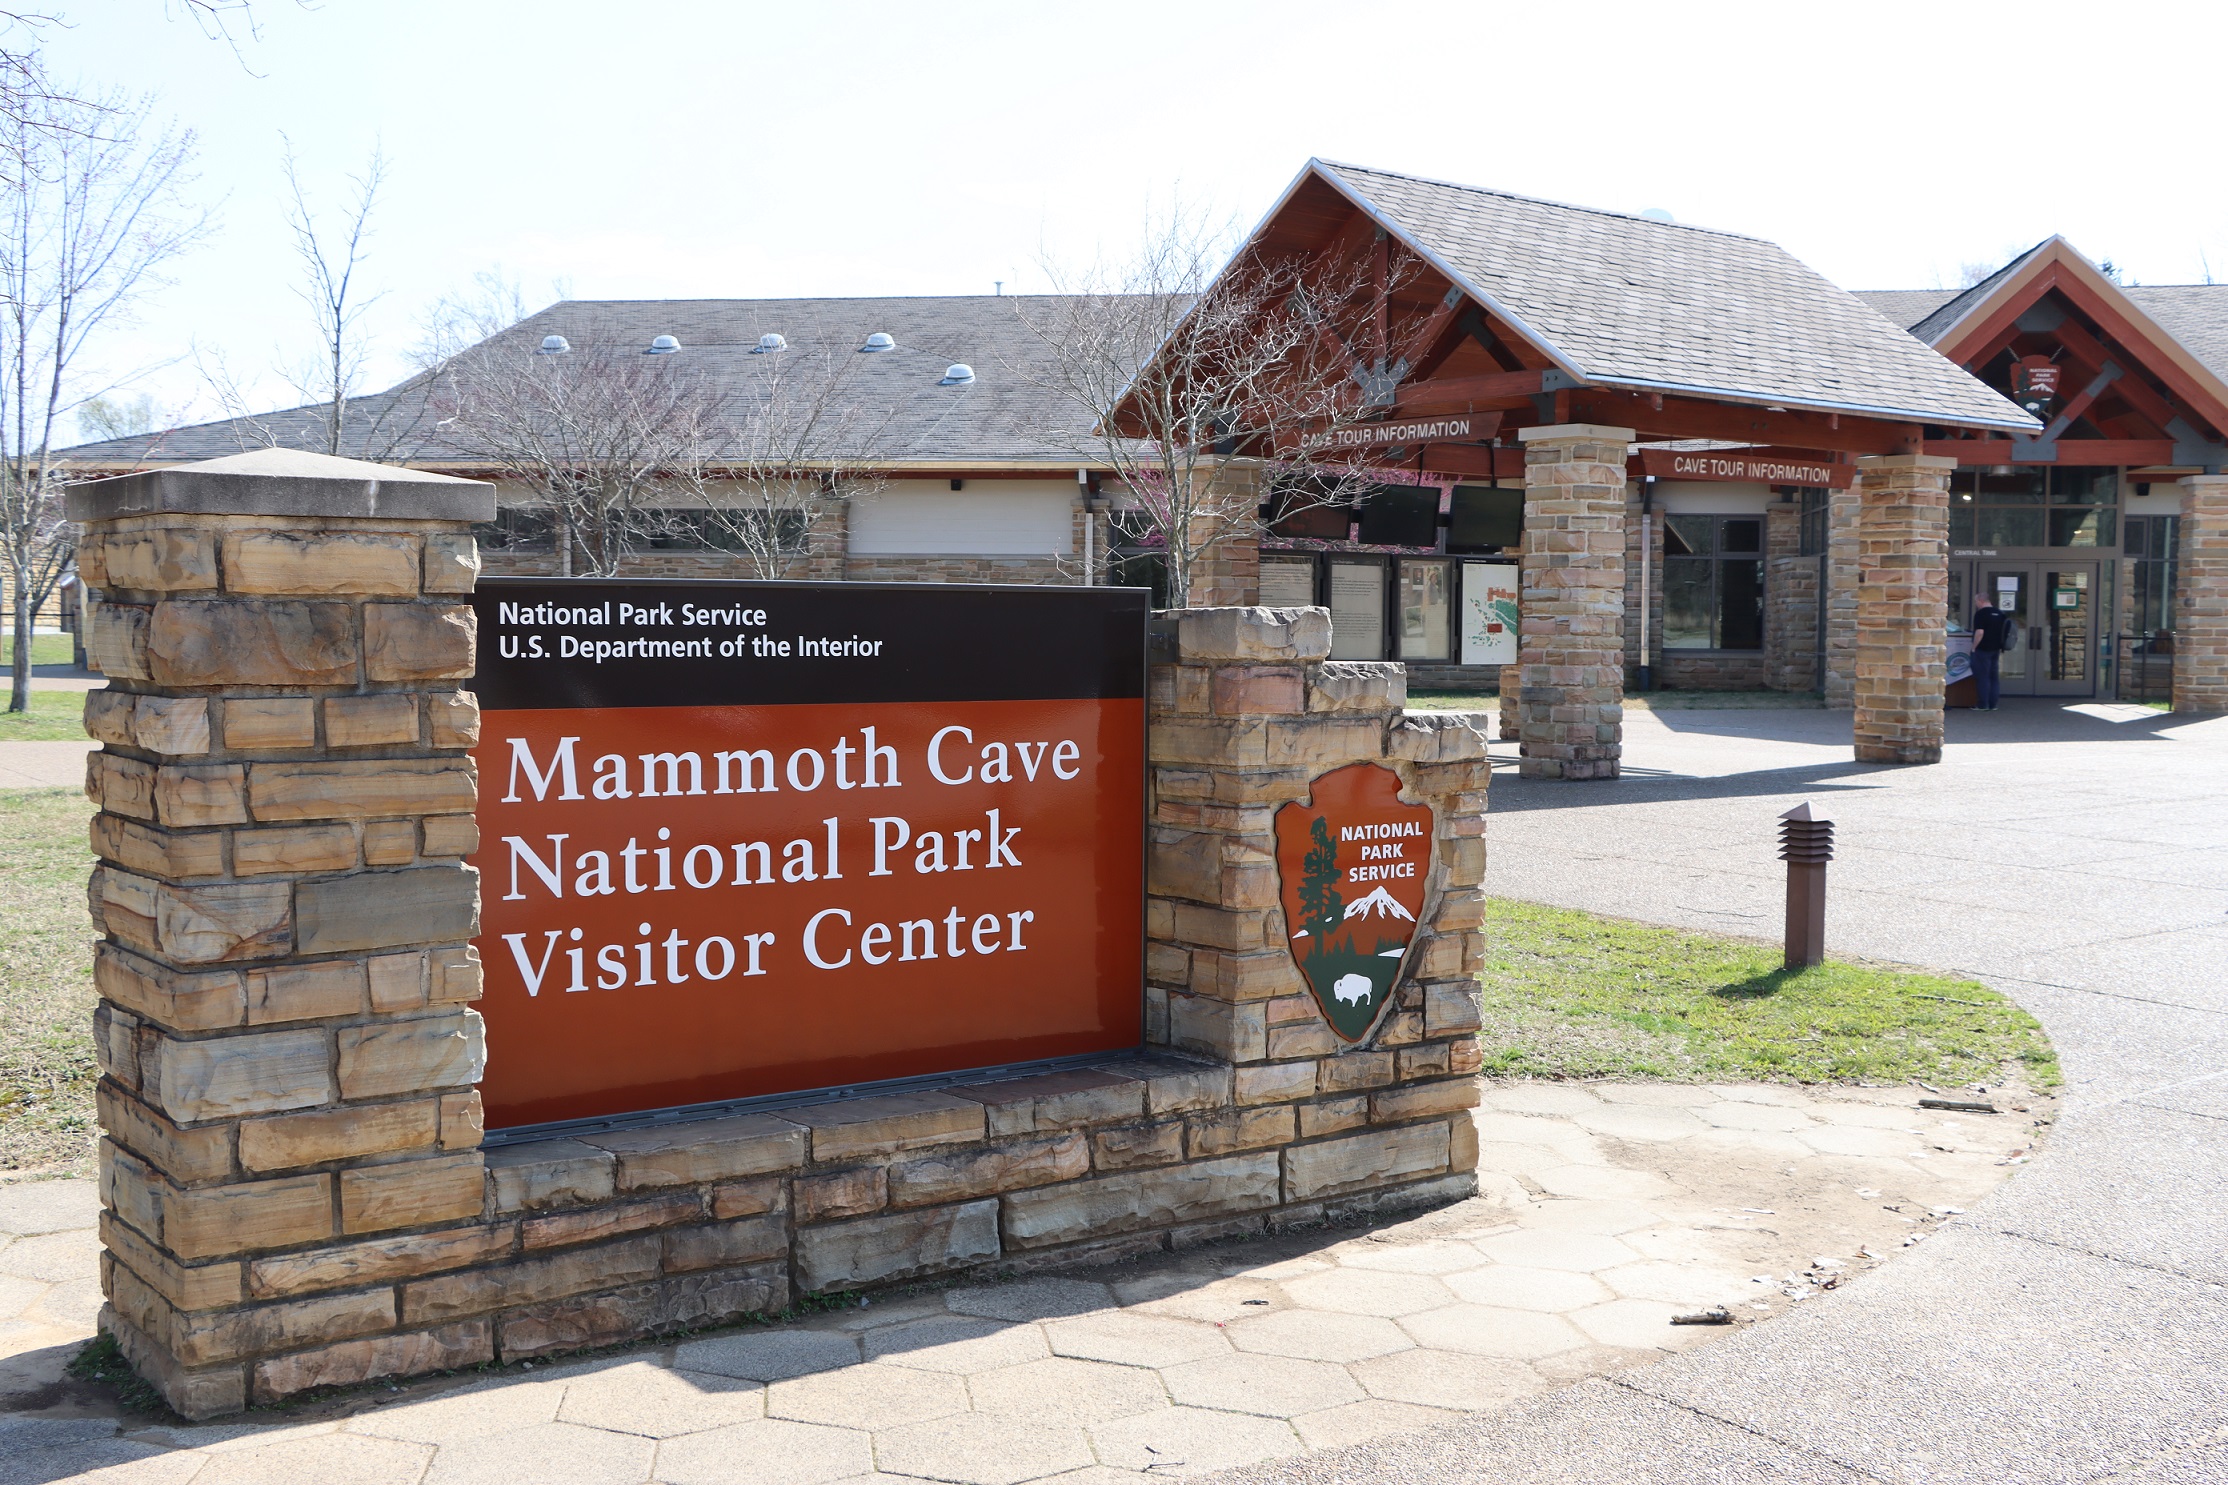 A sign says "Mammoth Cave Natioal Park Visitor Center" stands in front of a large stone building.